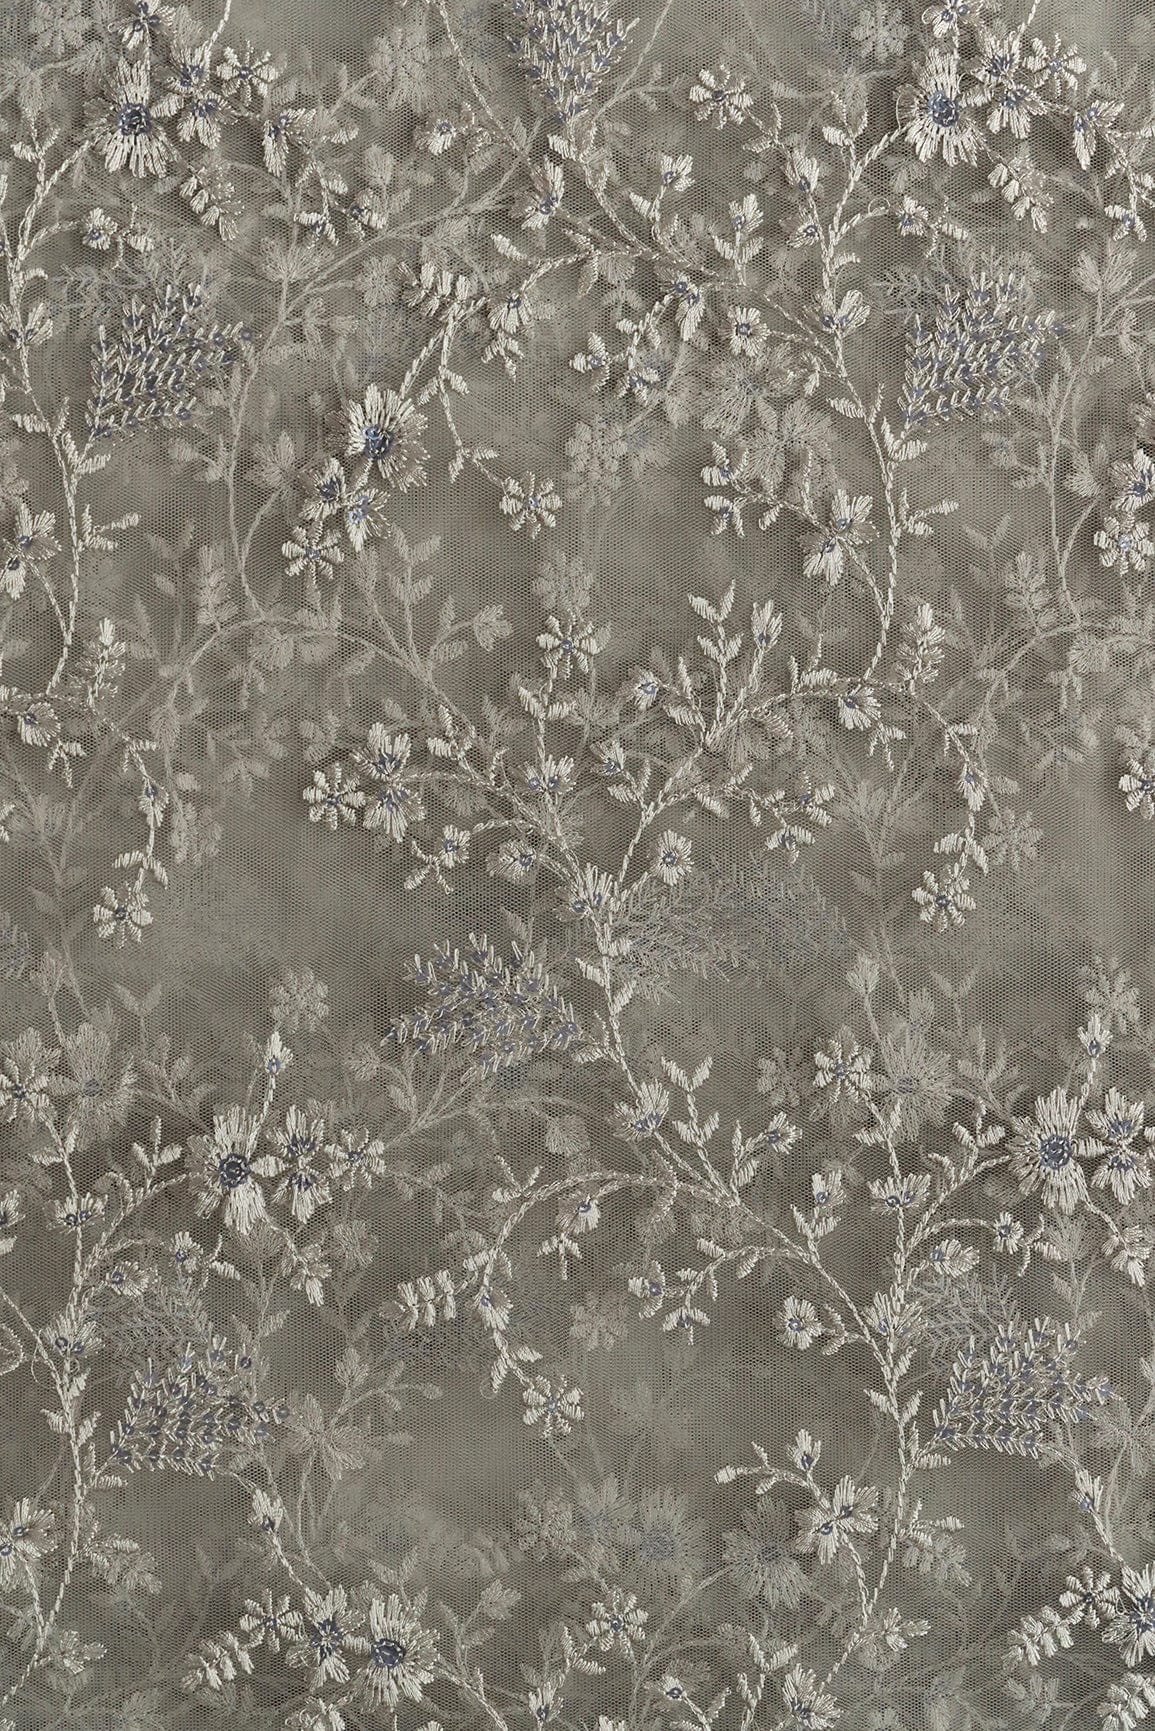 doeraa Embroidery Fabrics Grey Thread With Sequins Beautiful Floral Embroidery Work On Grey Soft Net Fabric